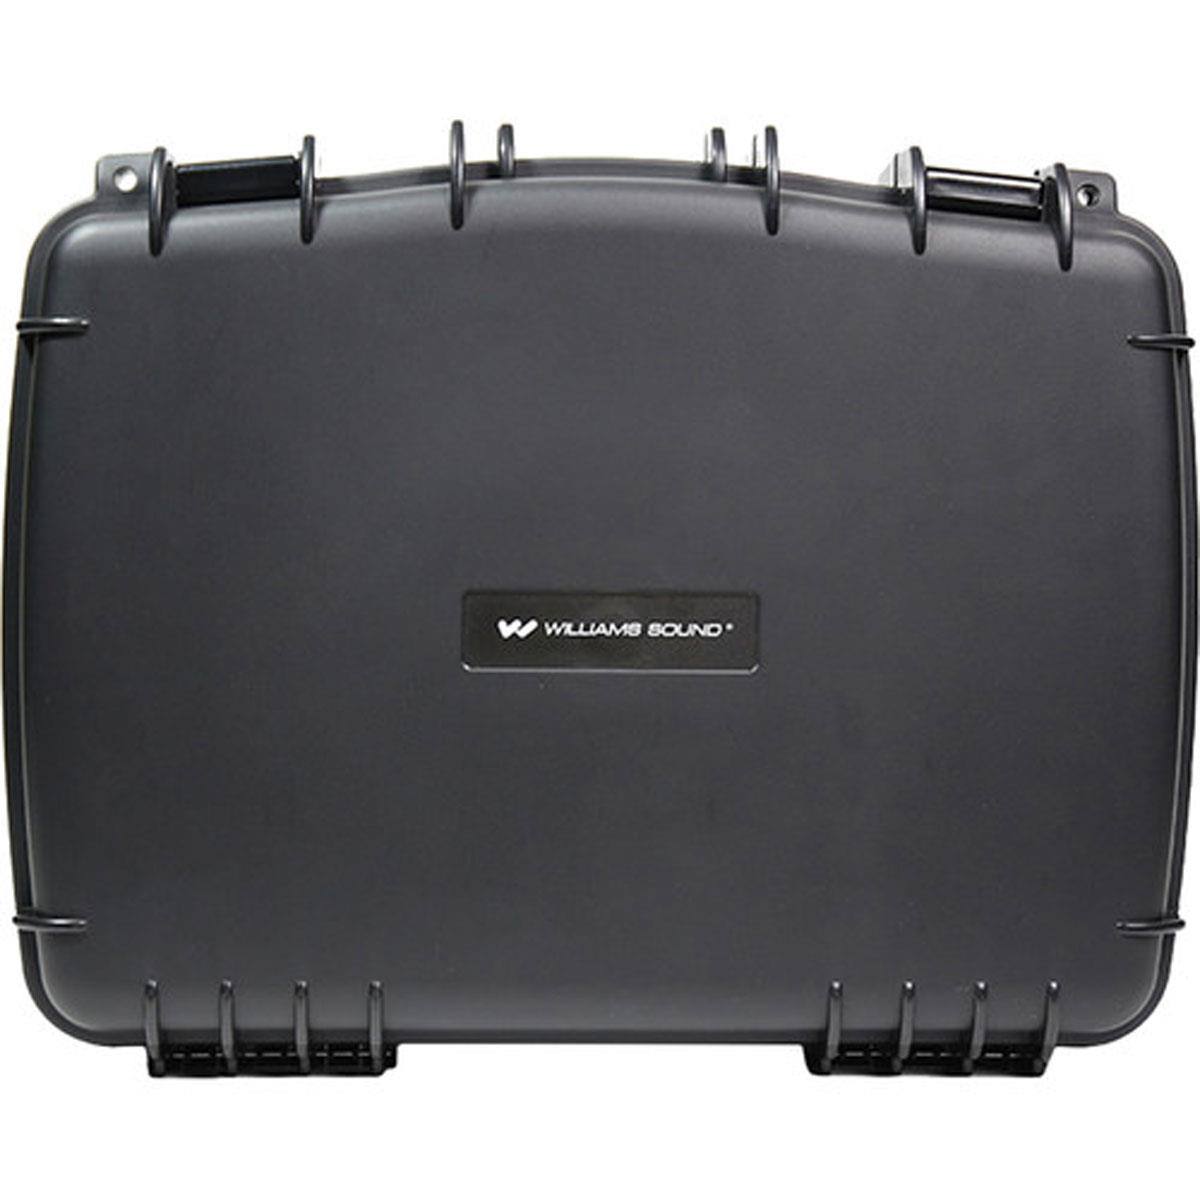 Image of Williams Sound Water Resistant System Carry Case without Foam Insert